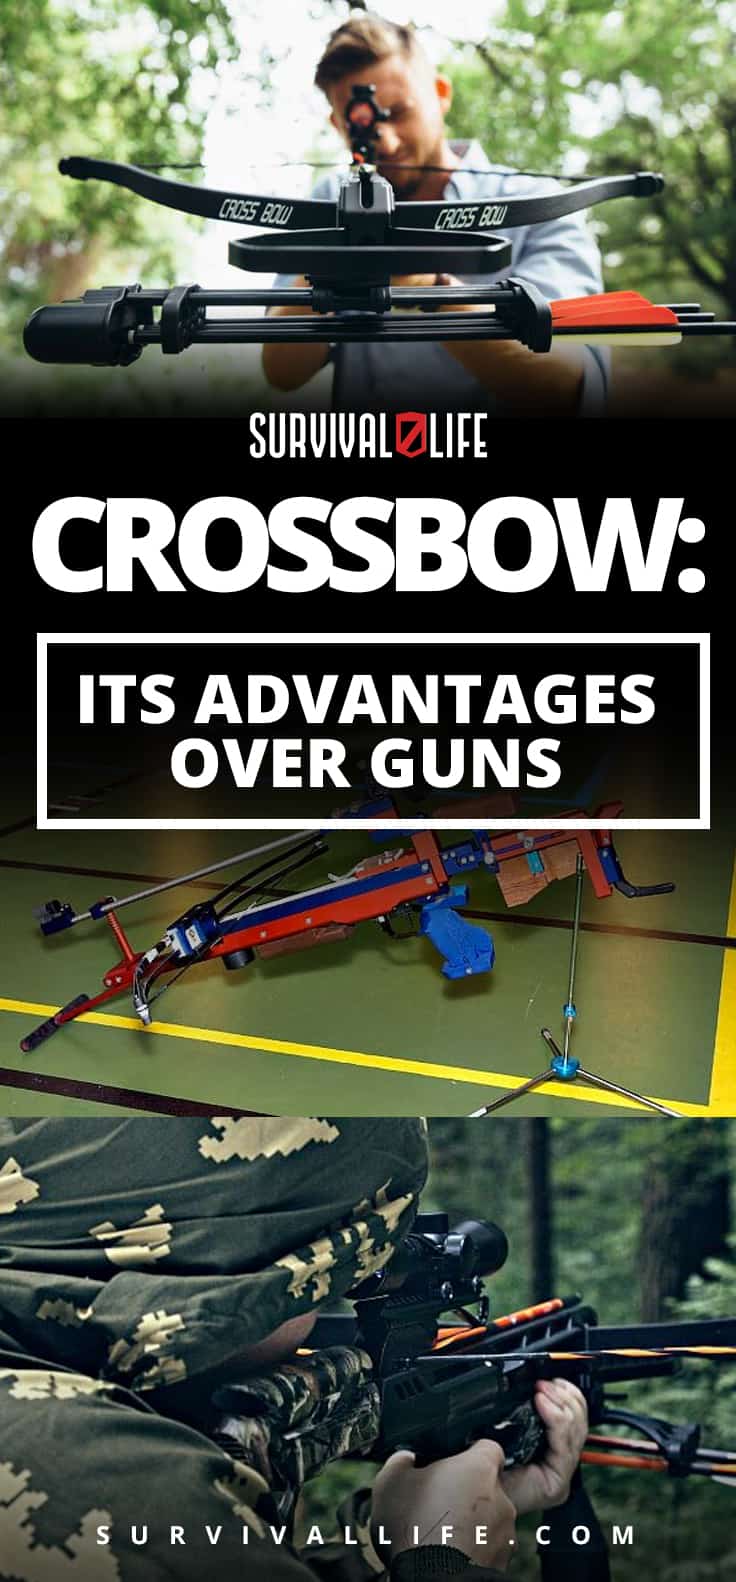 How To Use A Crossbow And Why Use It Over Guns | https://survivallife.com/how-use-crossbow/